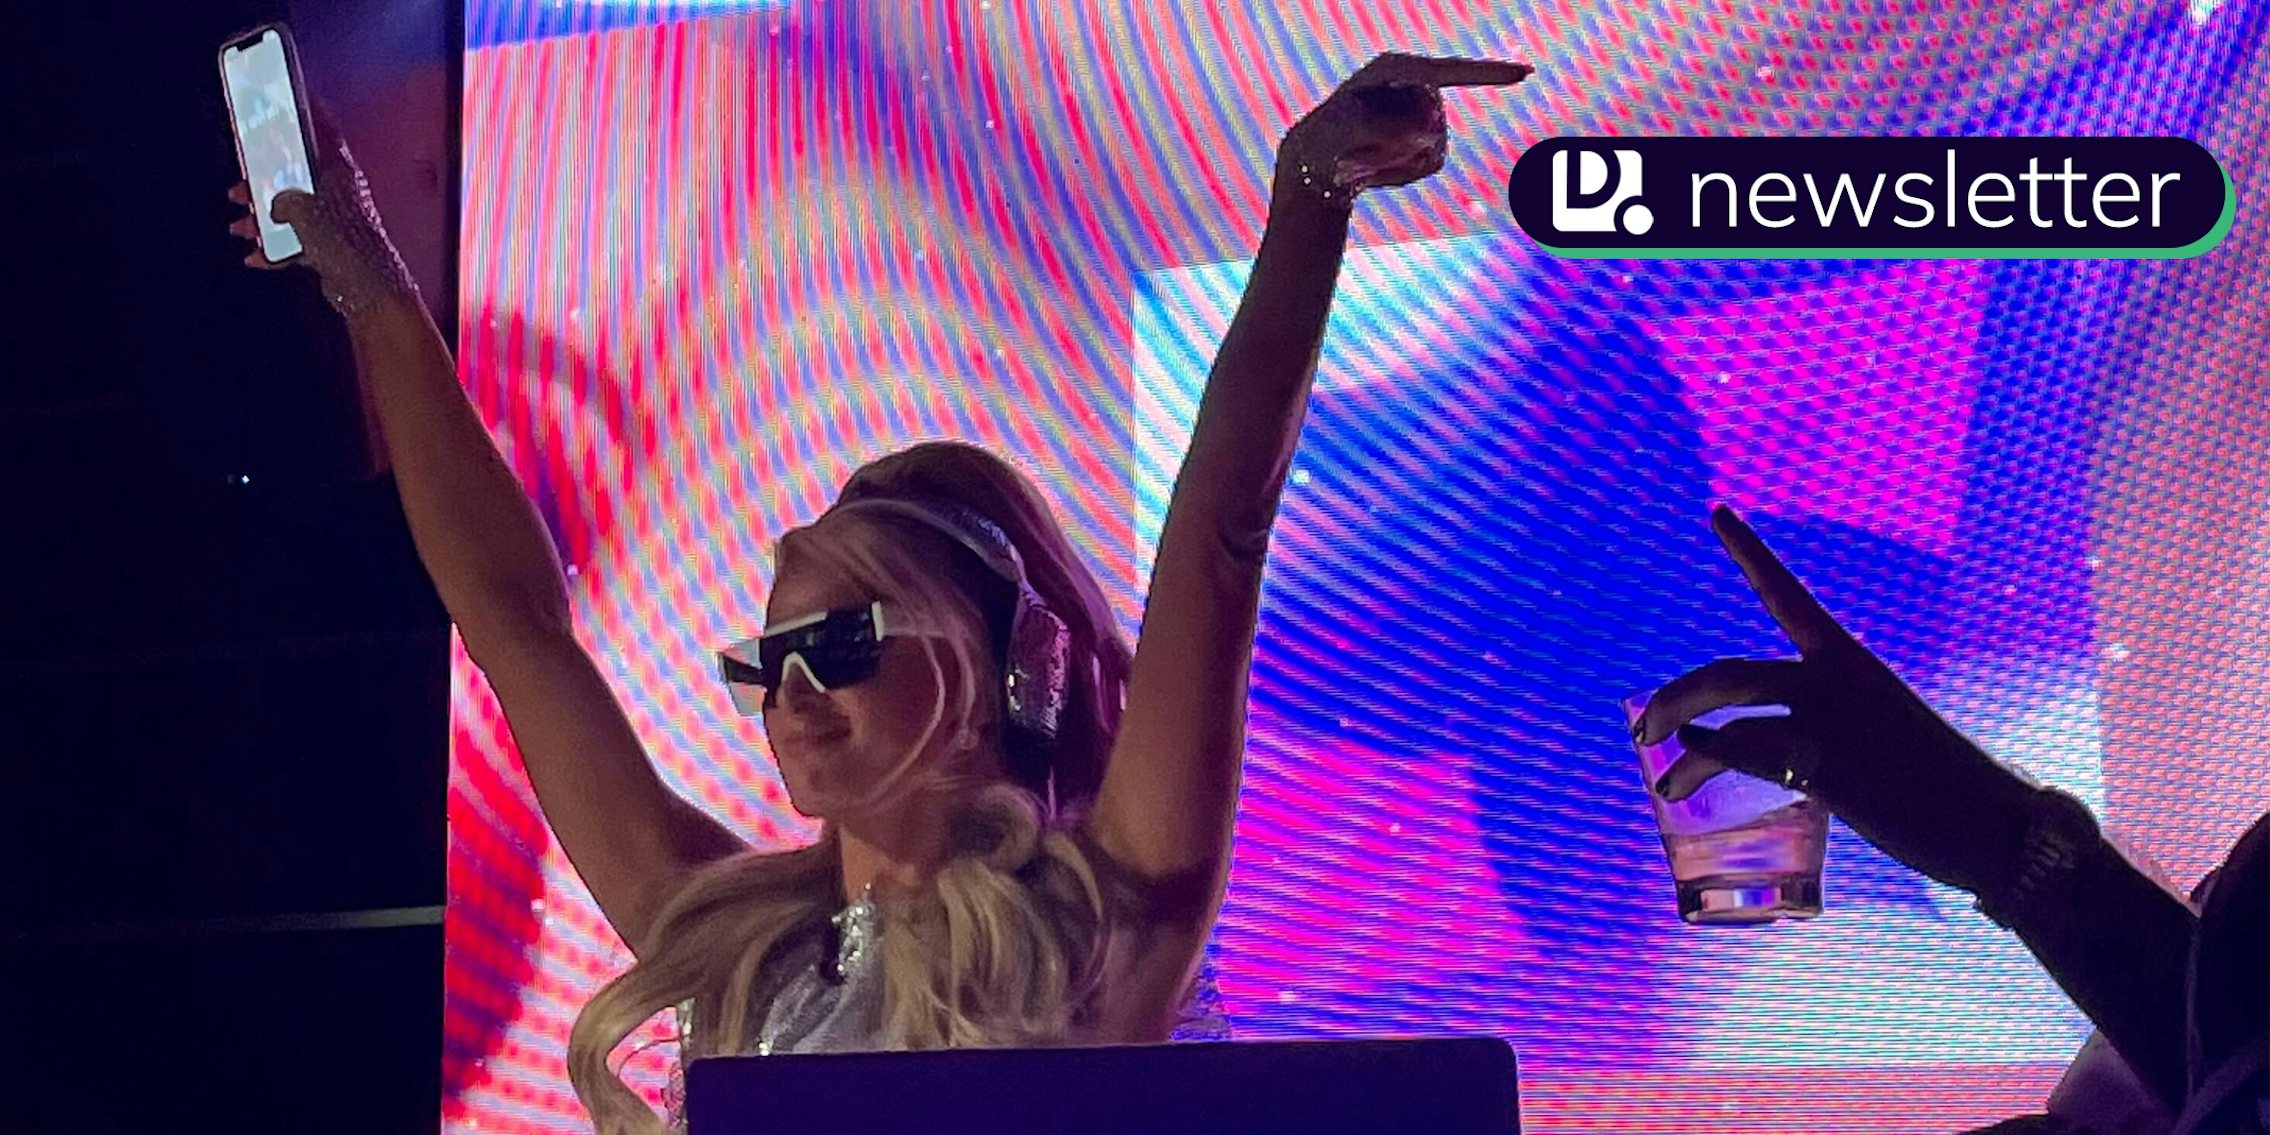 Paris Hilton at SXSW 2022. In the top right corner is the Daily Dot newsletter logo.